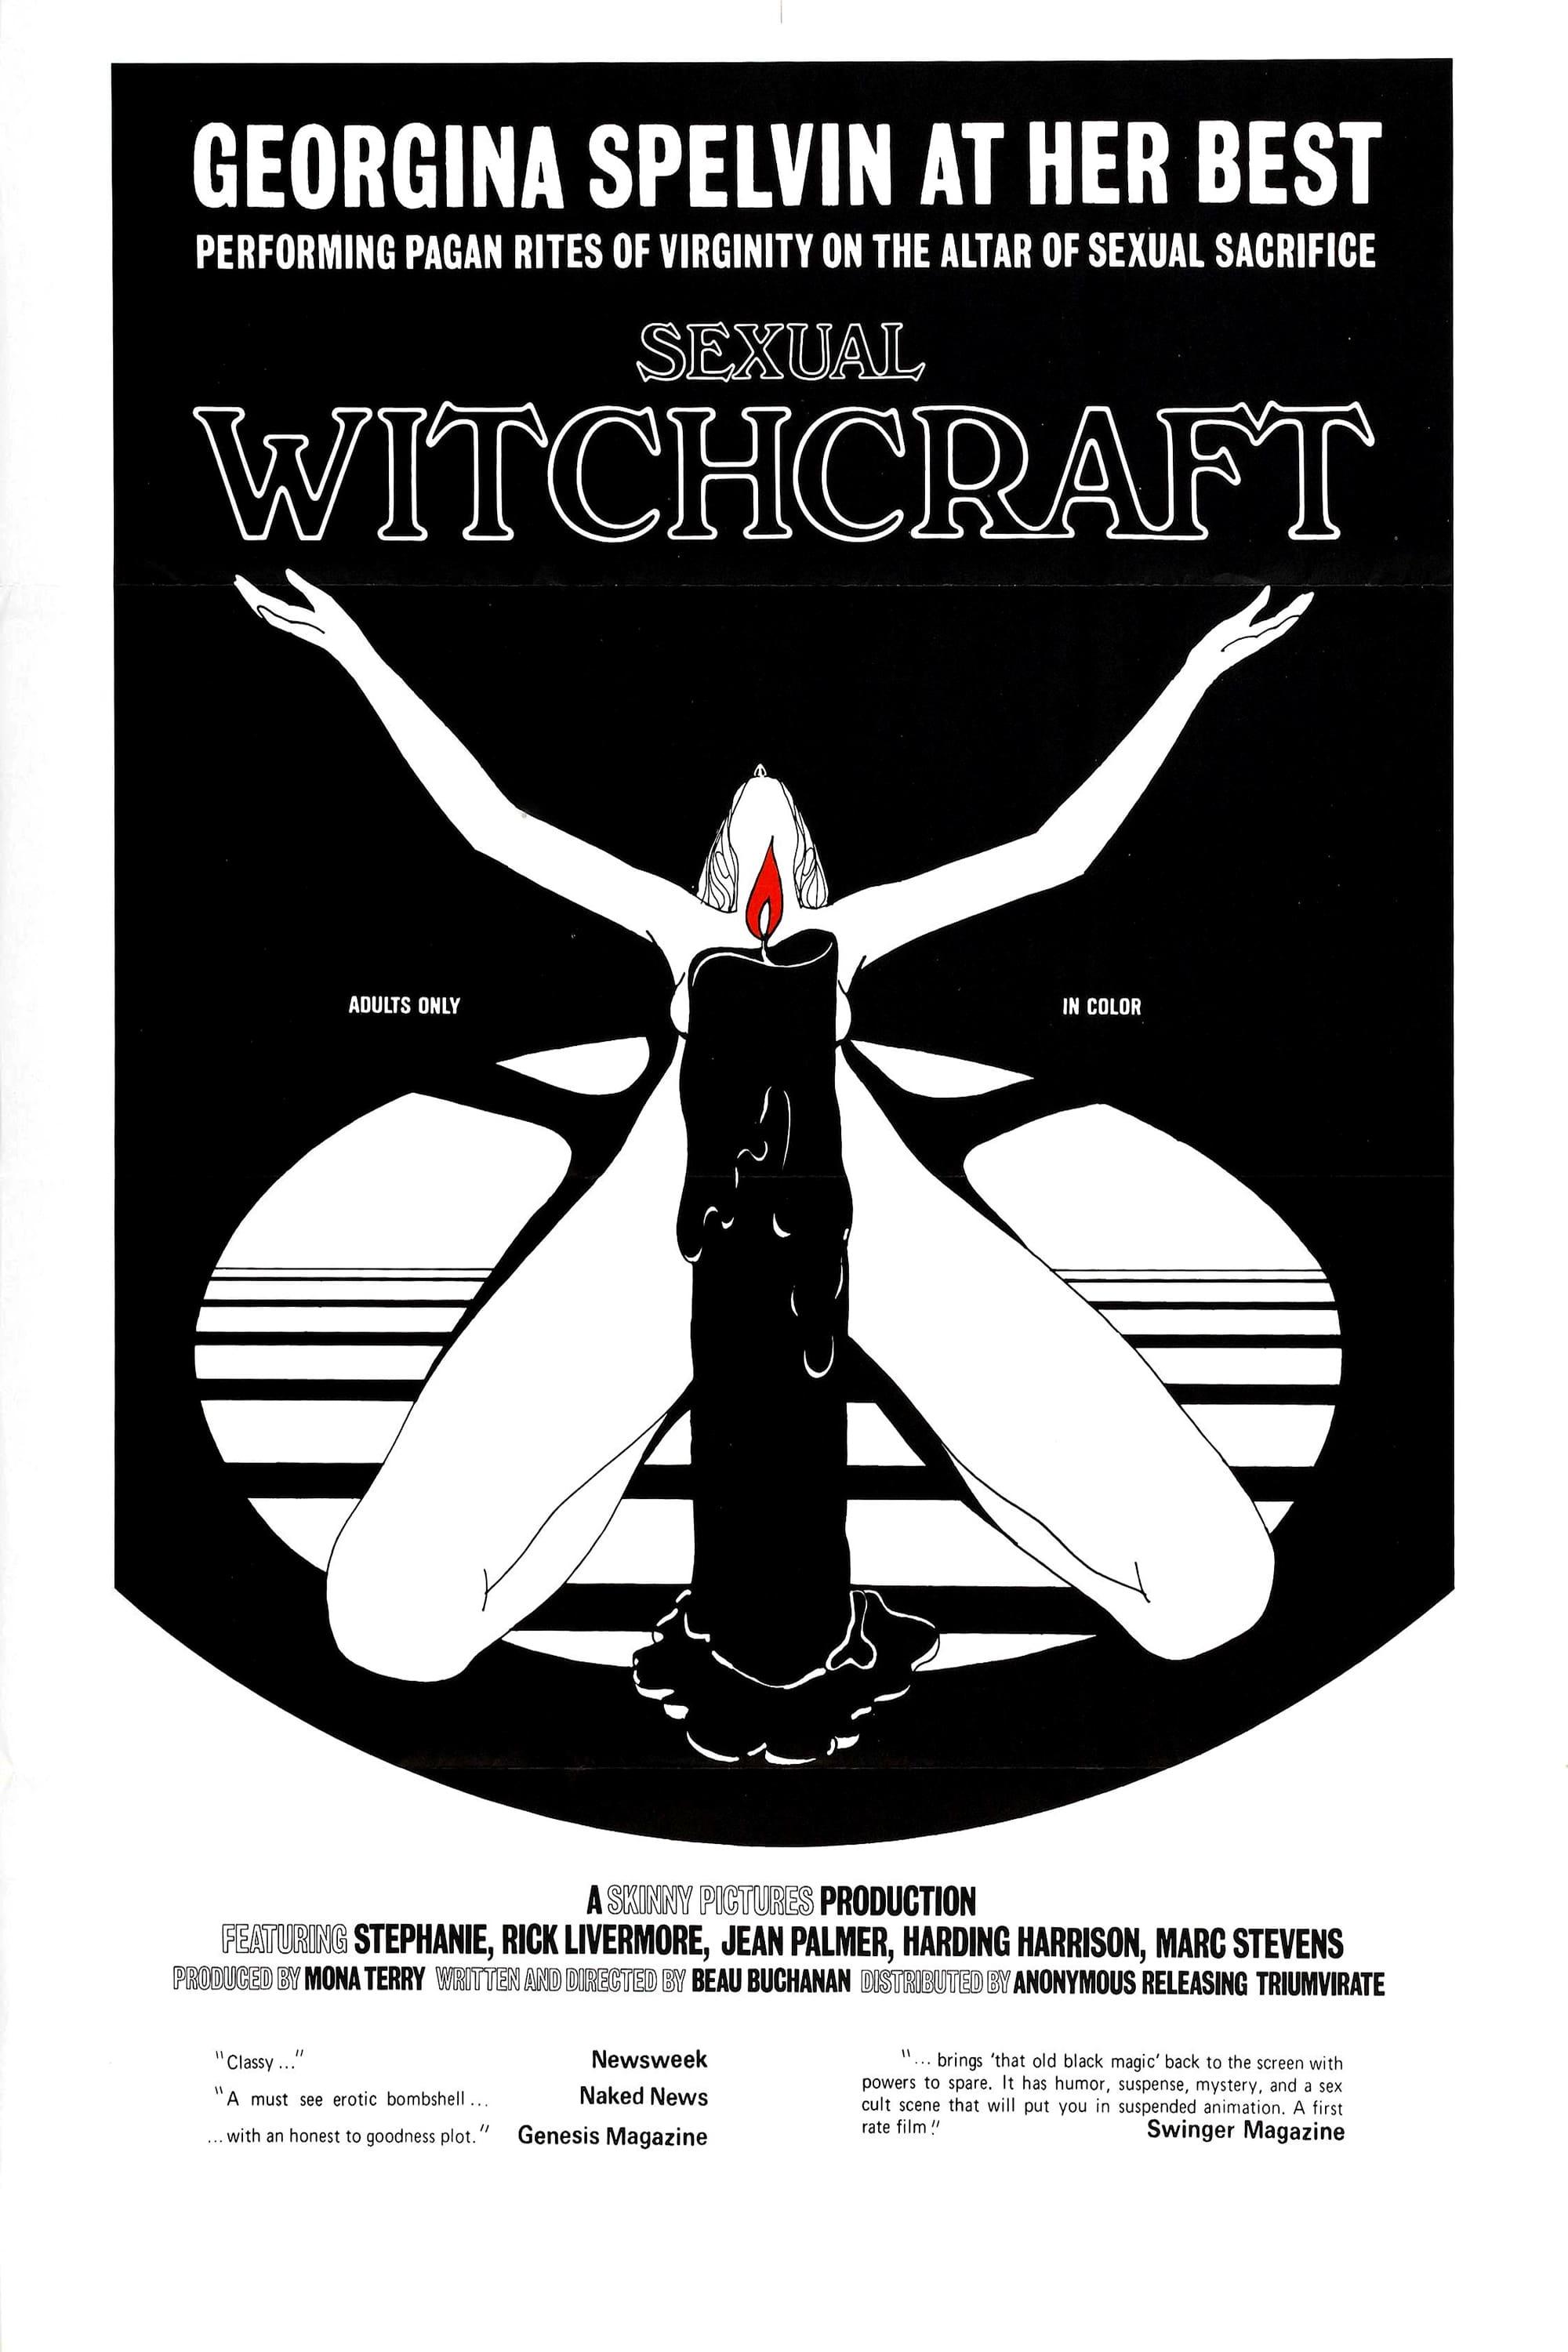 High Priestess of Sexual Witchcraft poster